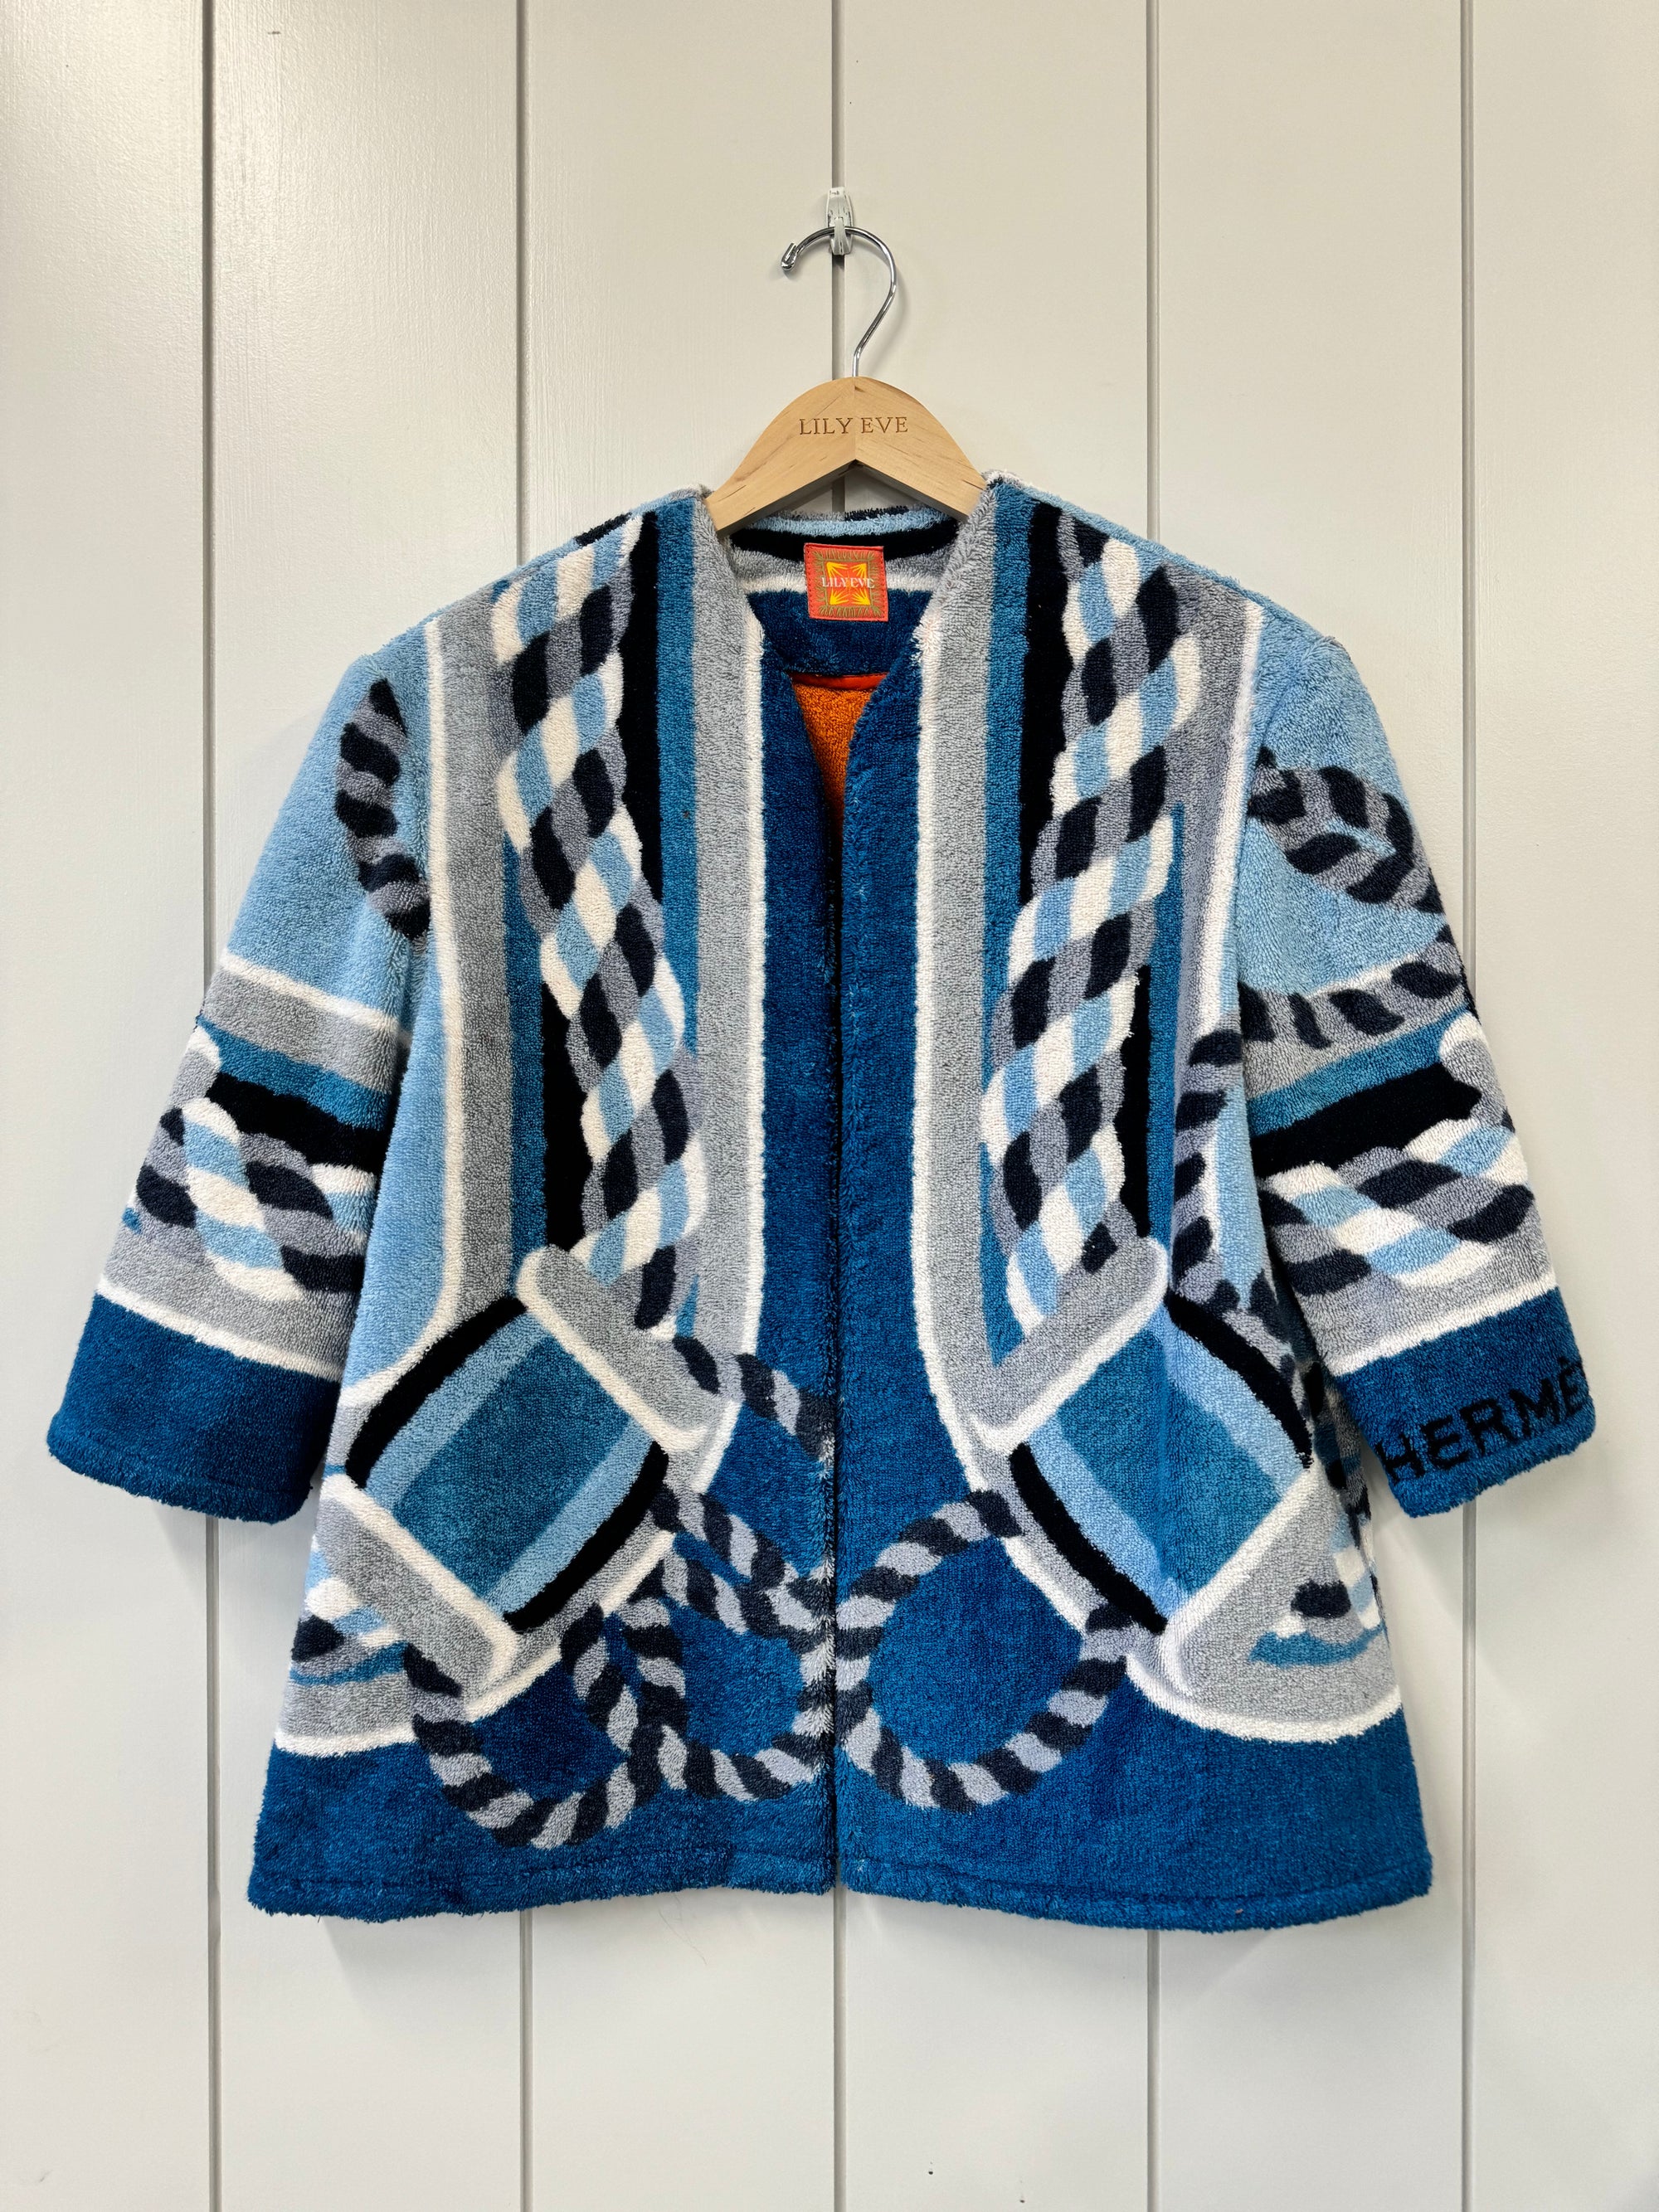 The Blue Rope Jacket